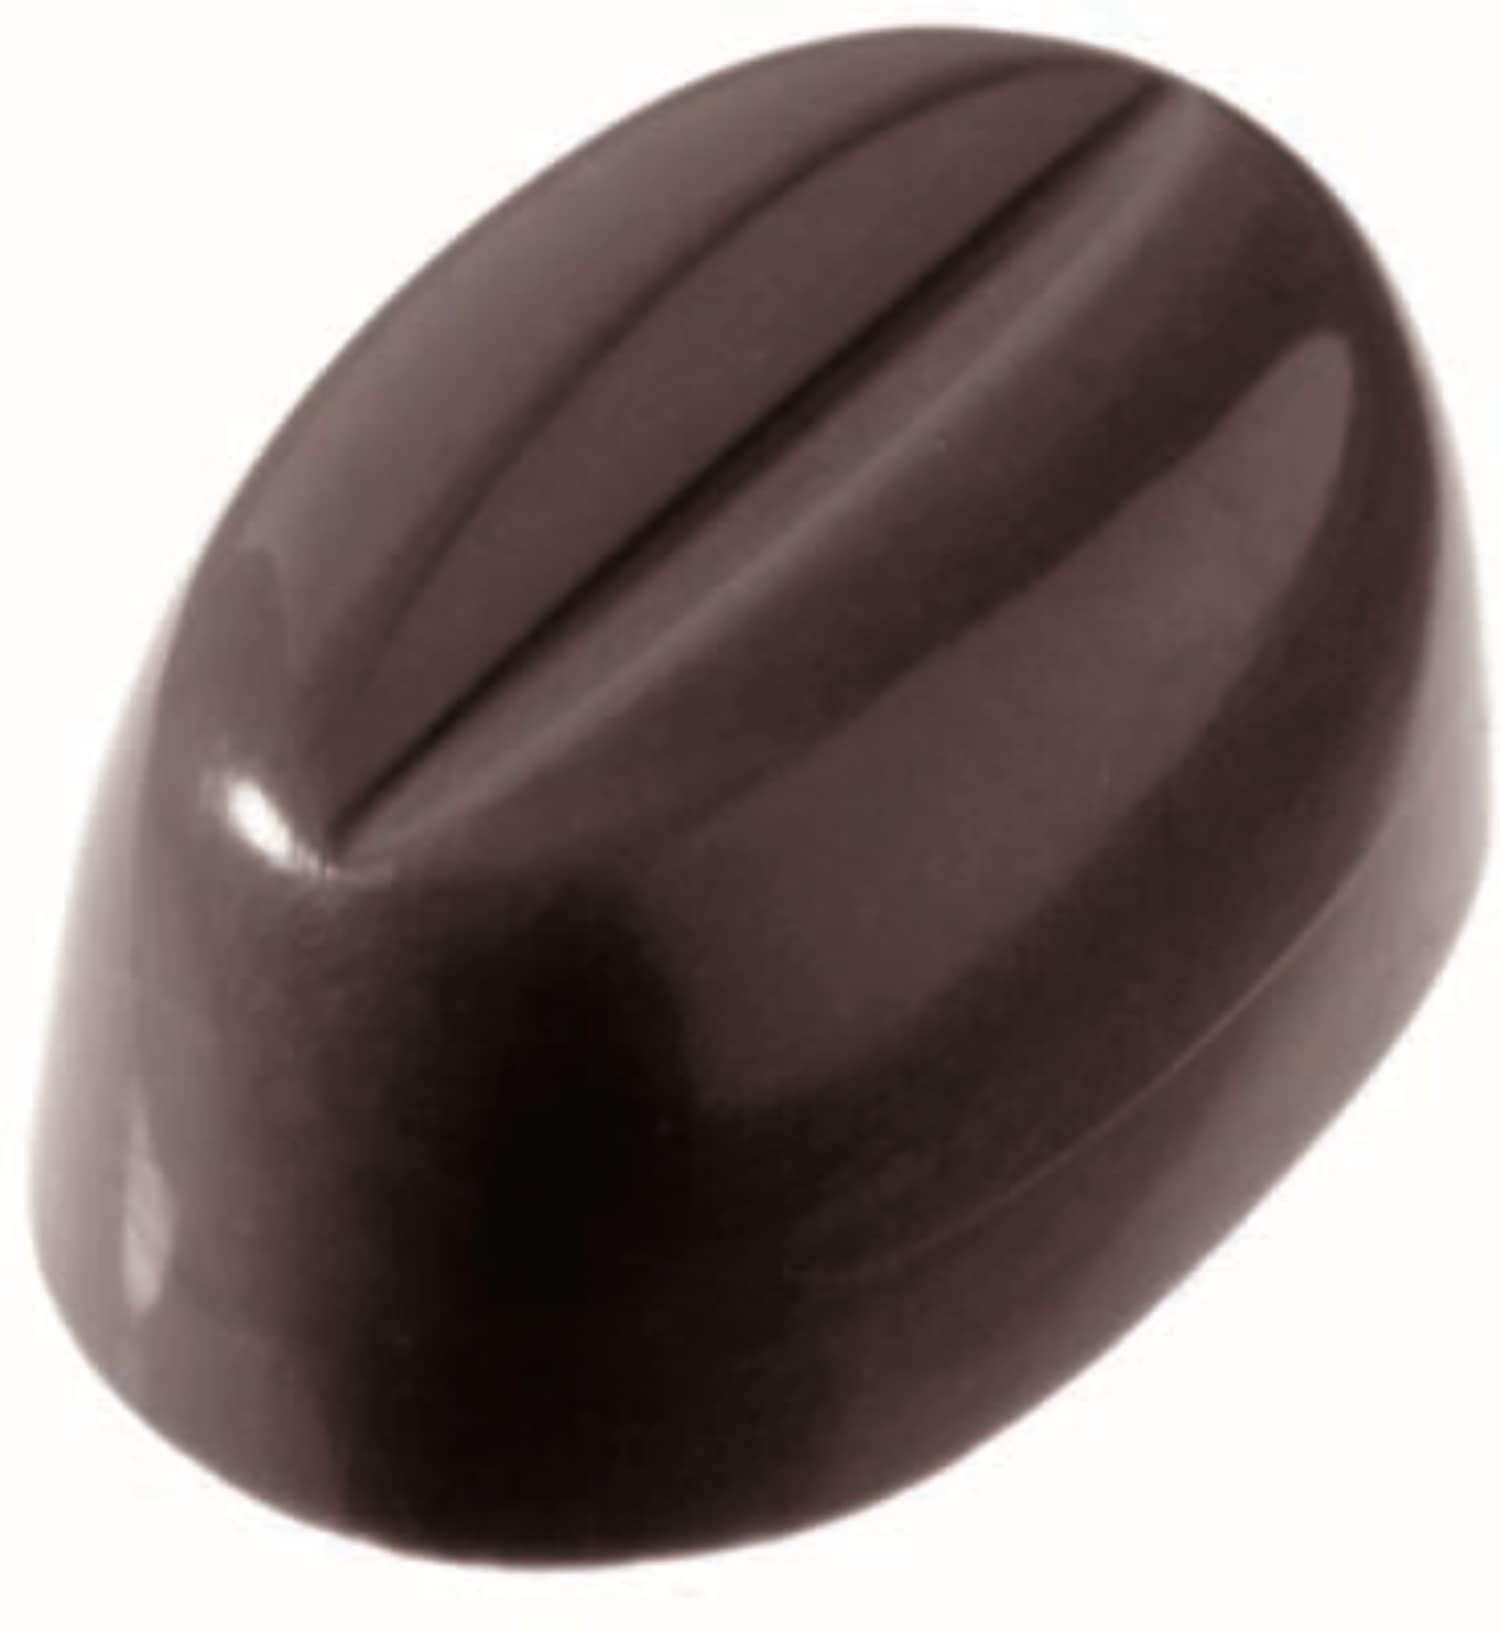 Chocolate mould "Coffee bean" 421327